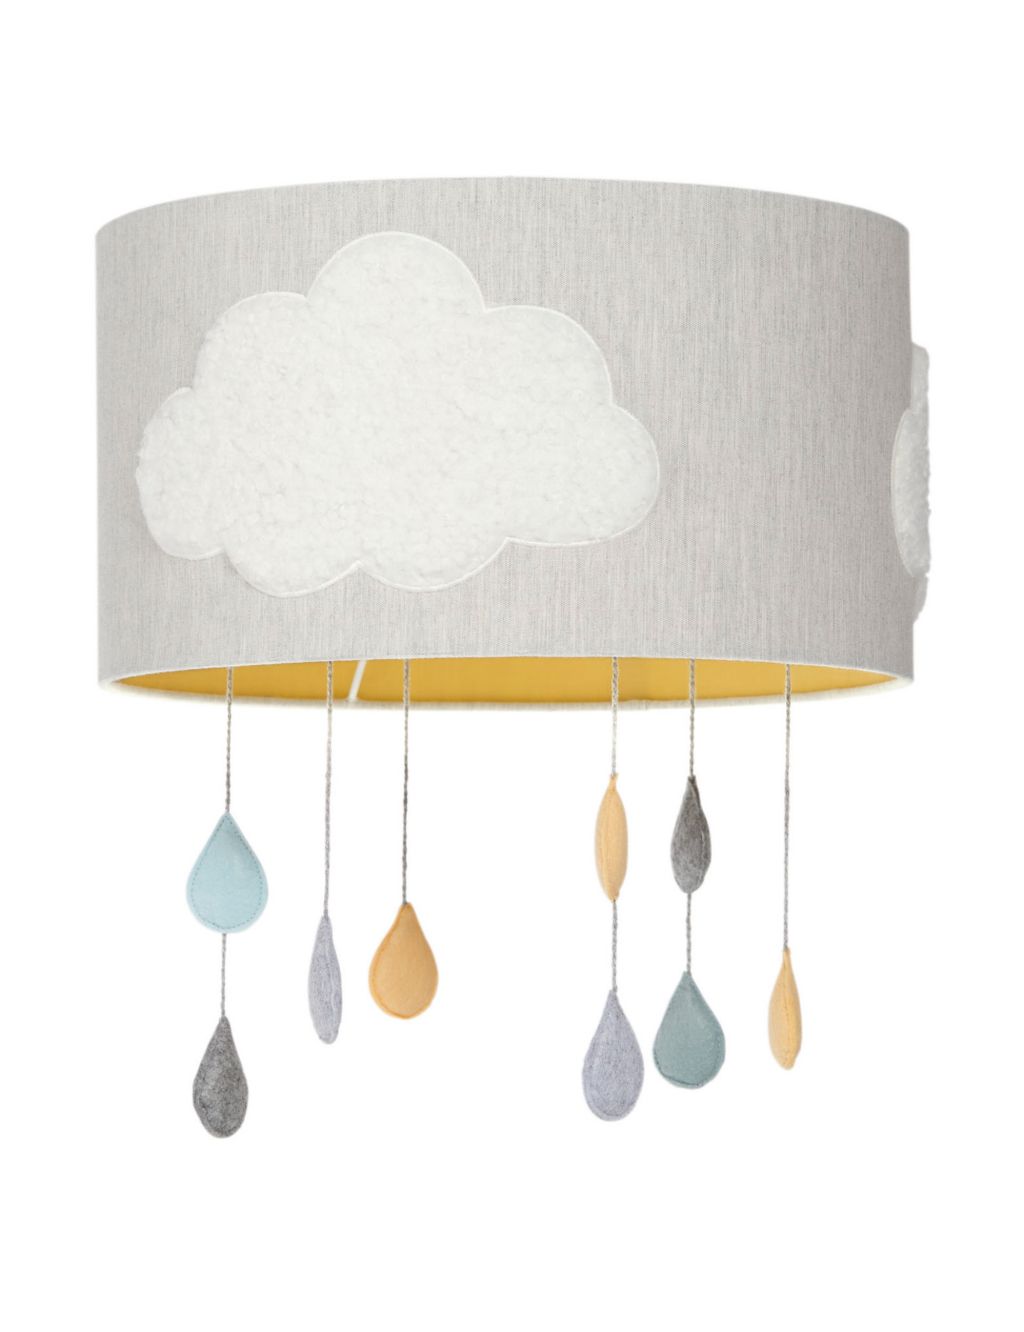 Dream Upon A Cloud Lampshade image 1